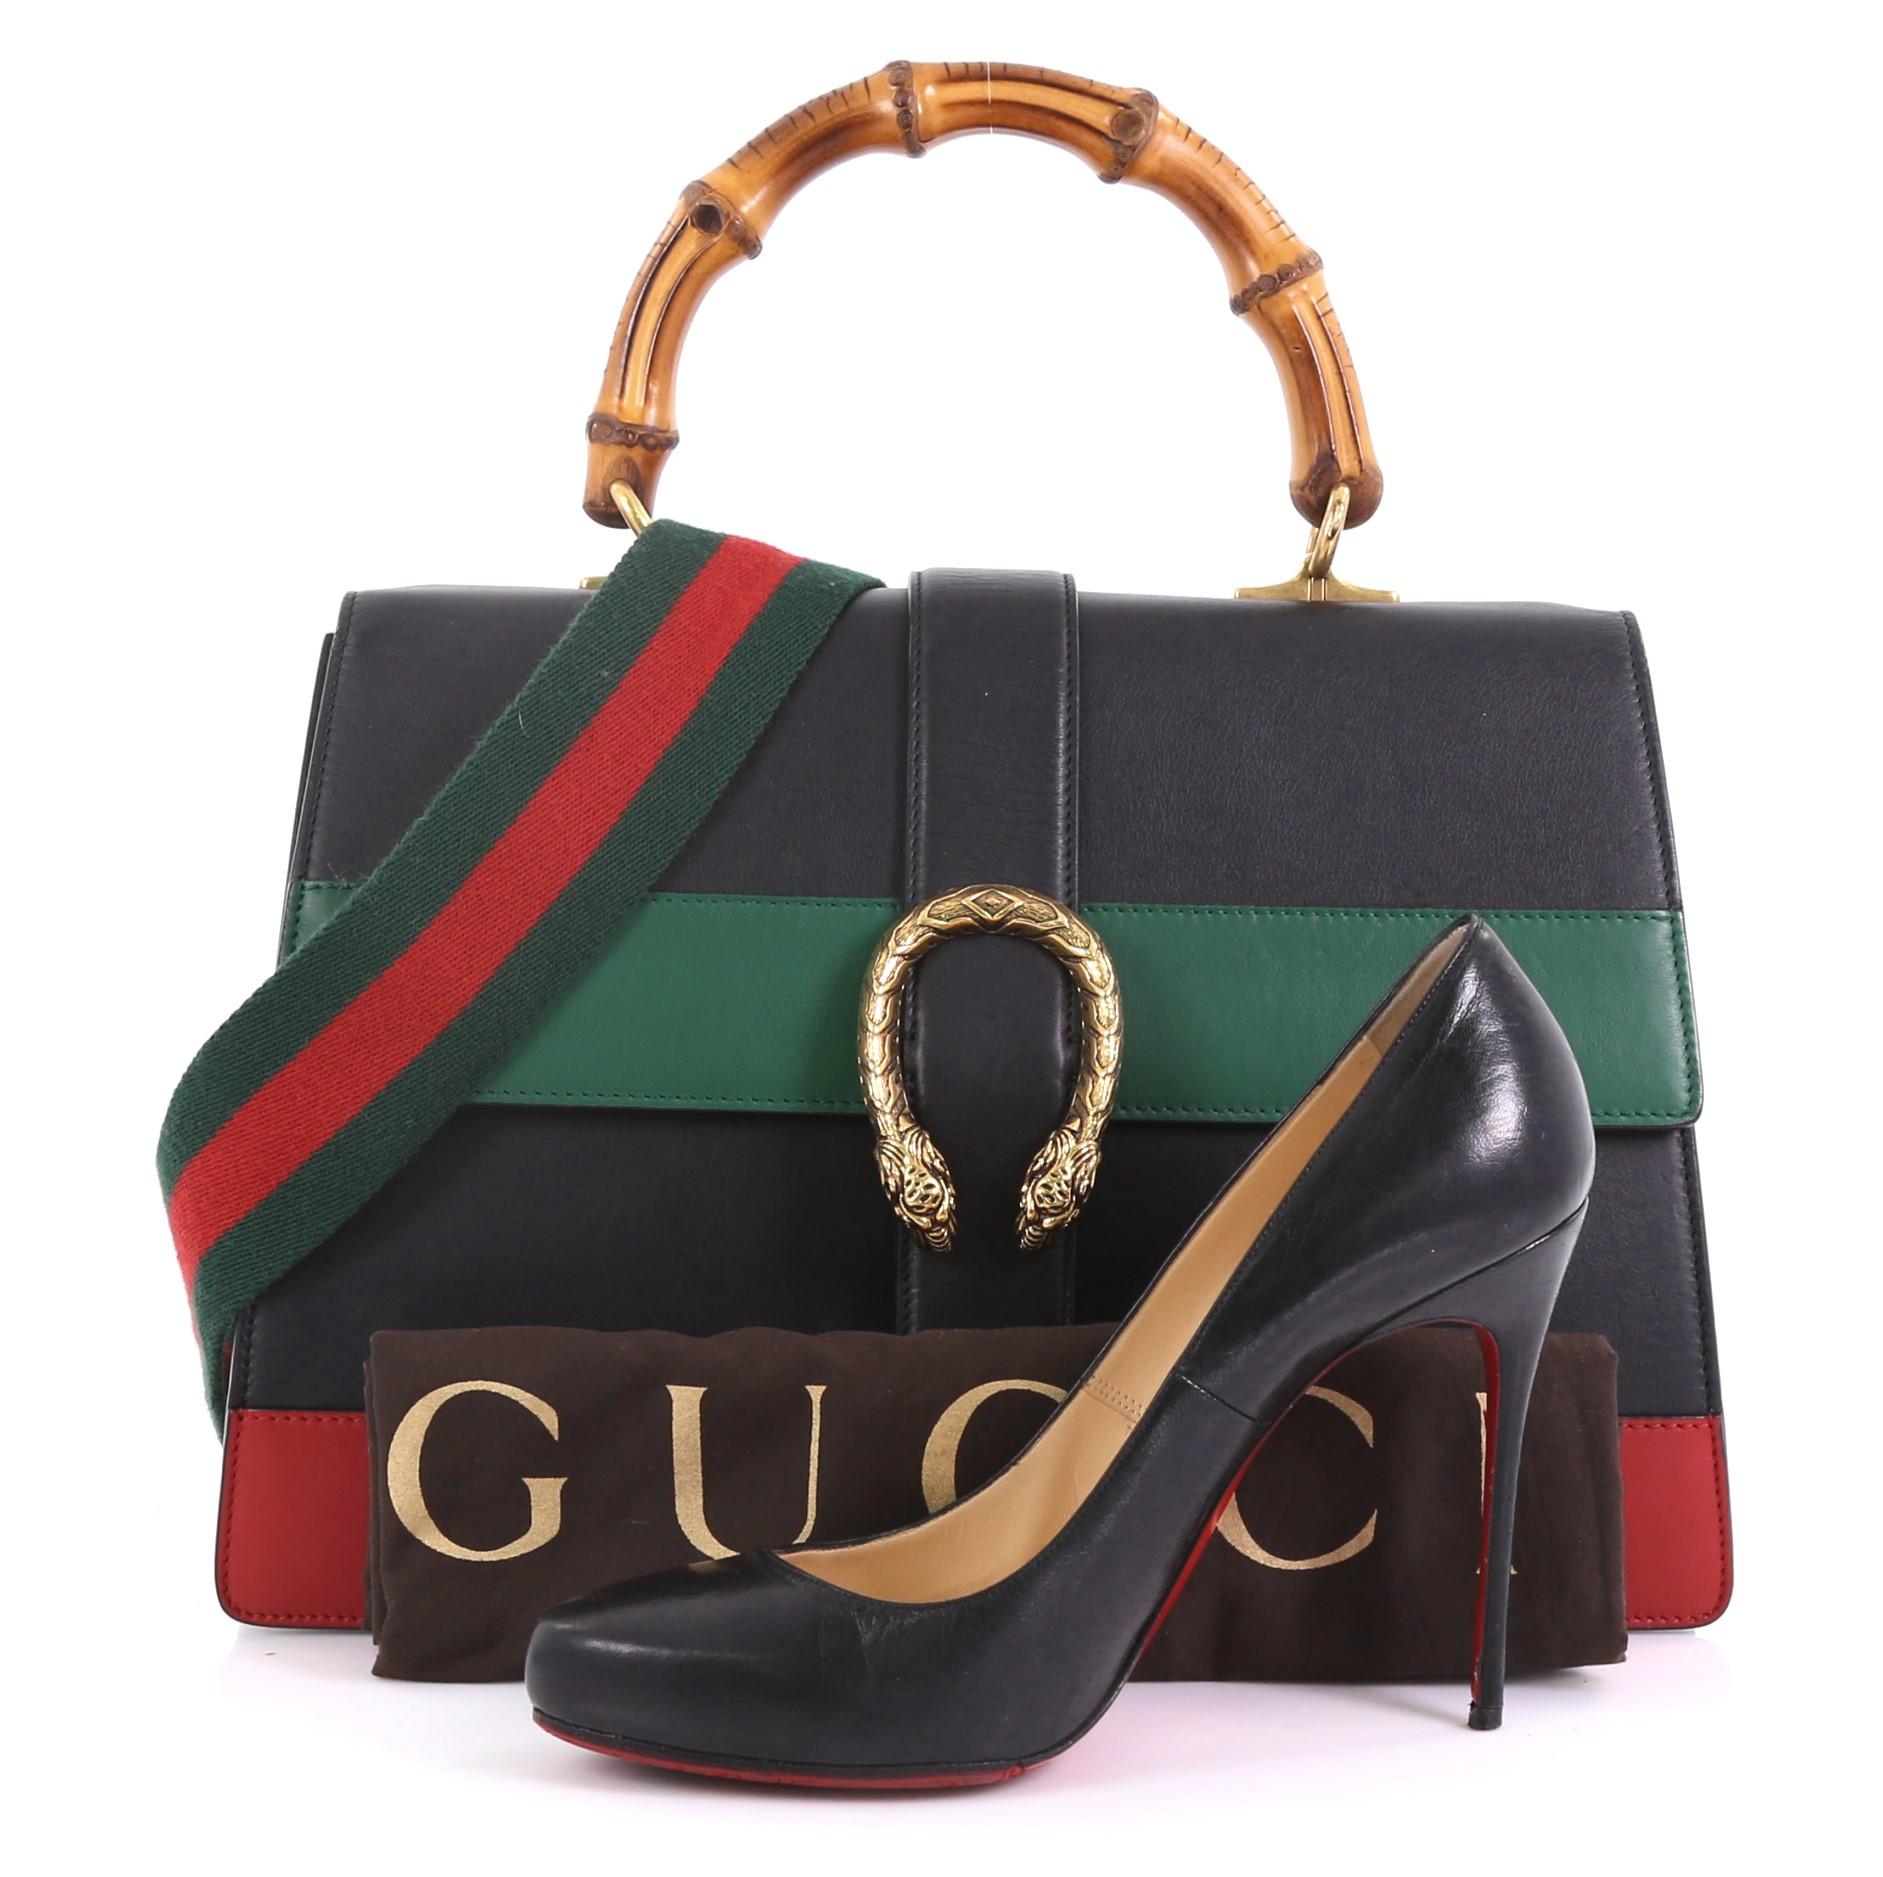 This Gucci Dionysus Bamboo Top Handle Bag Colorblock Leather Large, crafted from black, red and green leather, features a bamboo top handle, textured tiger head spur detail on its flap, and aged gold-tone hardware. Its closure with side release